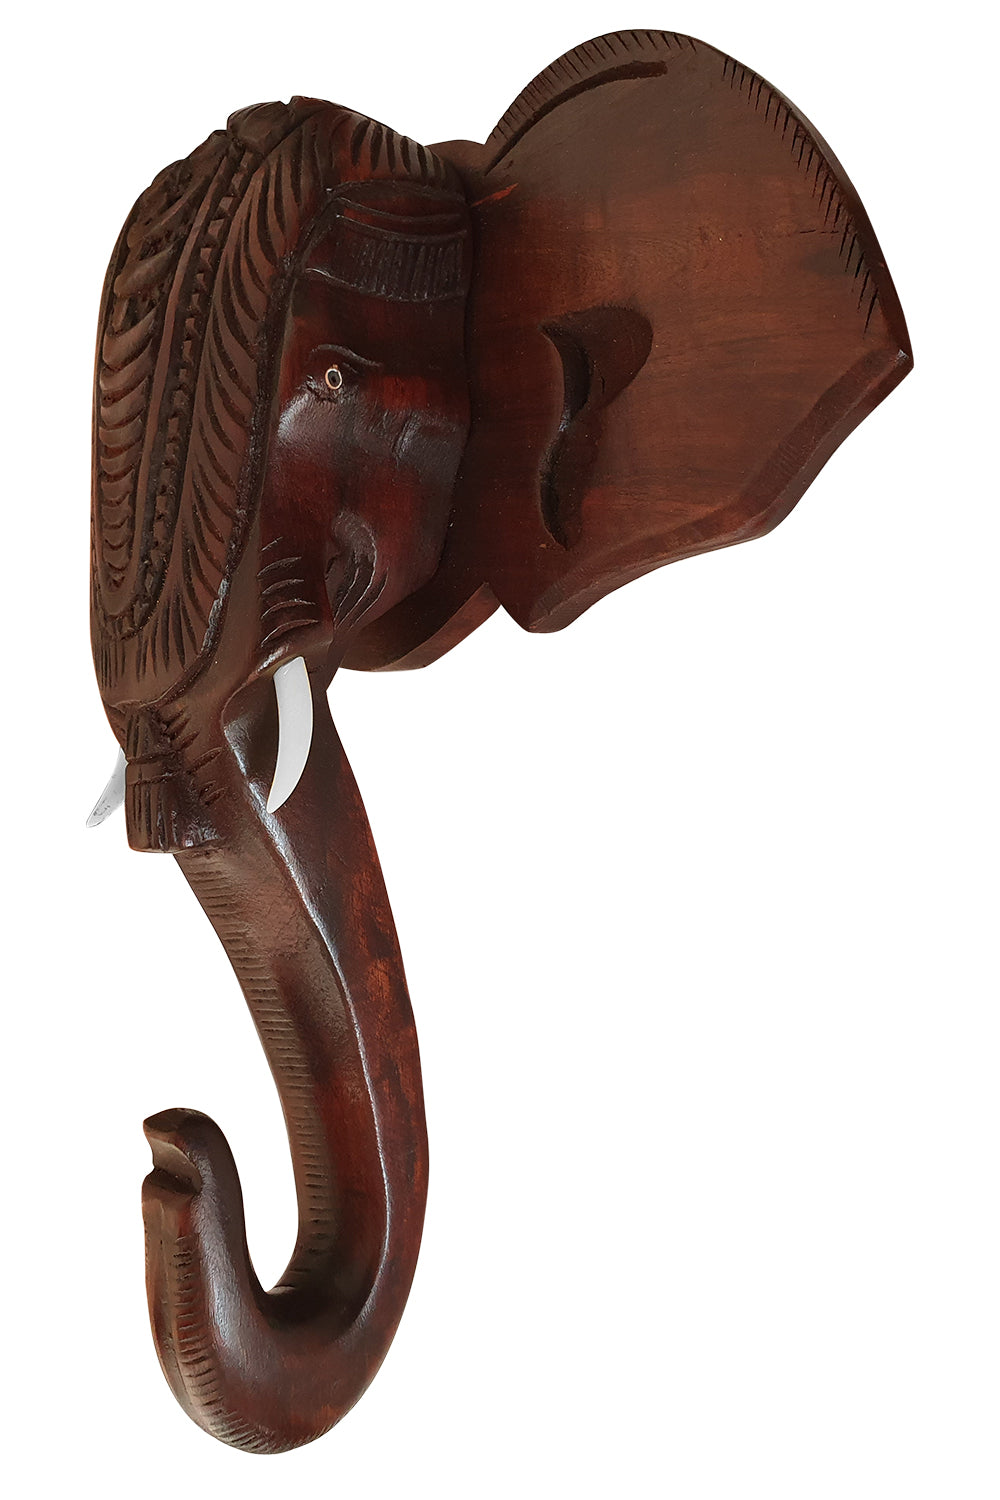 Southloom Handmade Elephant Head with Carved Patterns Handicraft (Carved from Mahogany Wood) 12 Inches